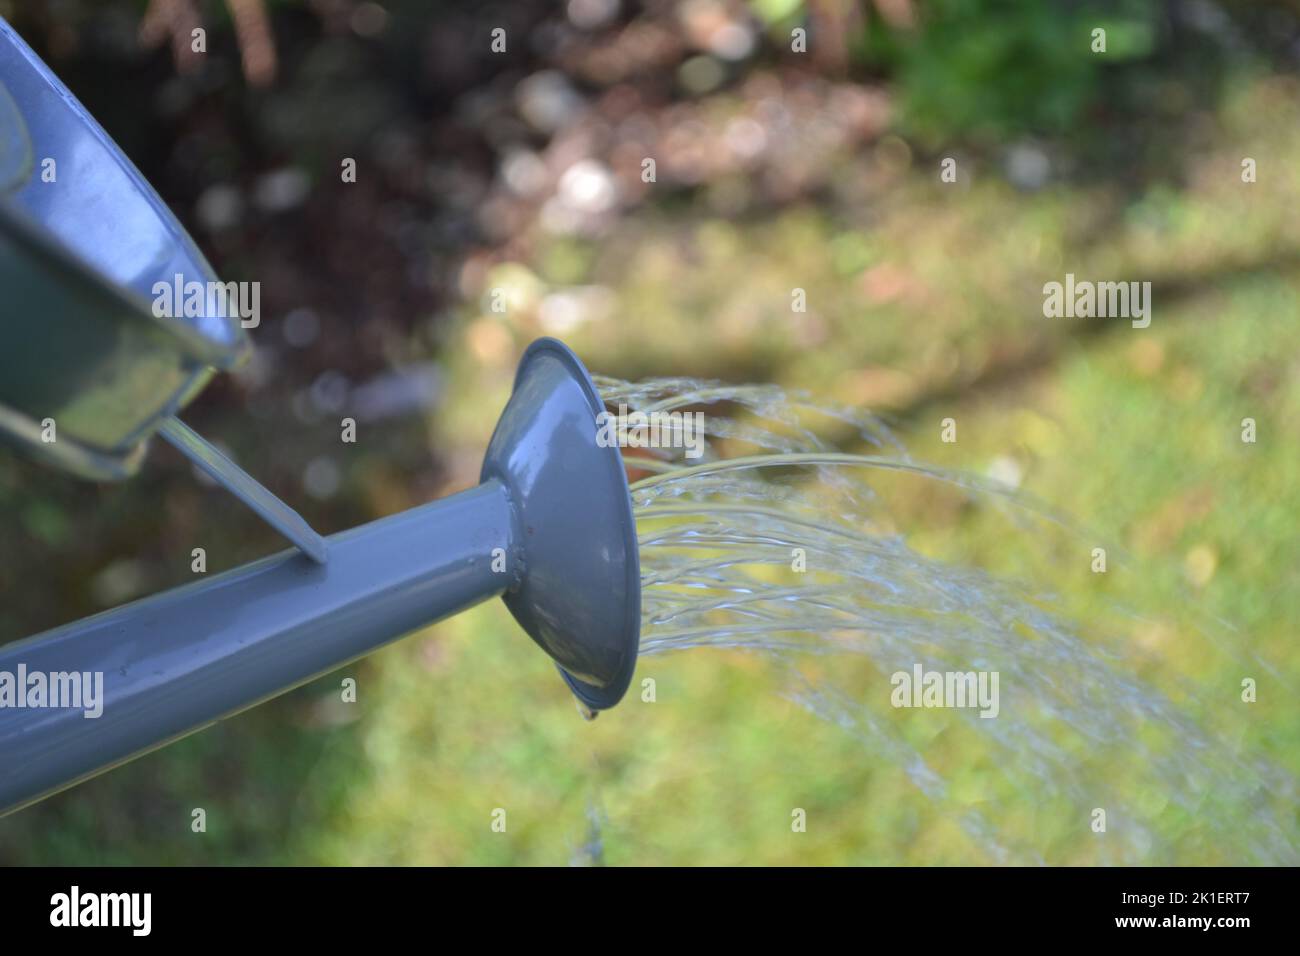 Watering Can Sprinkling Water Stock Photo